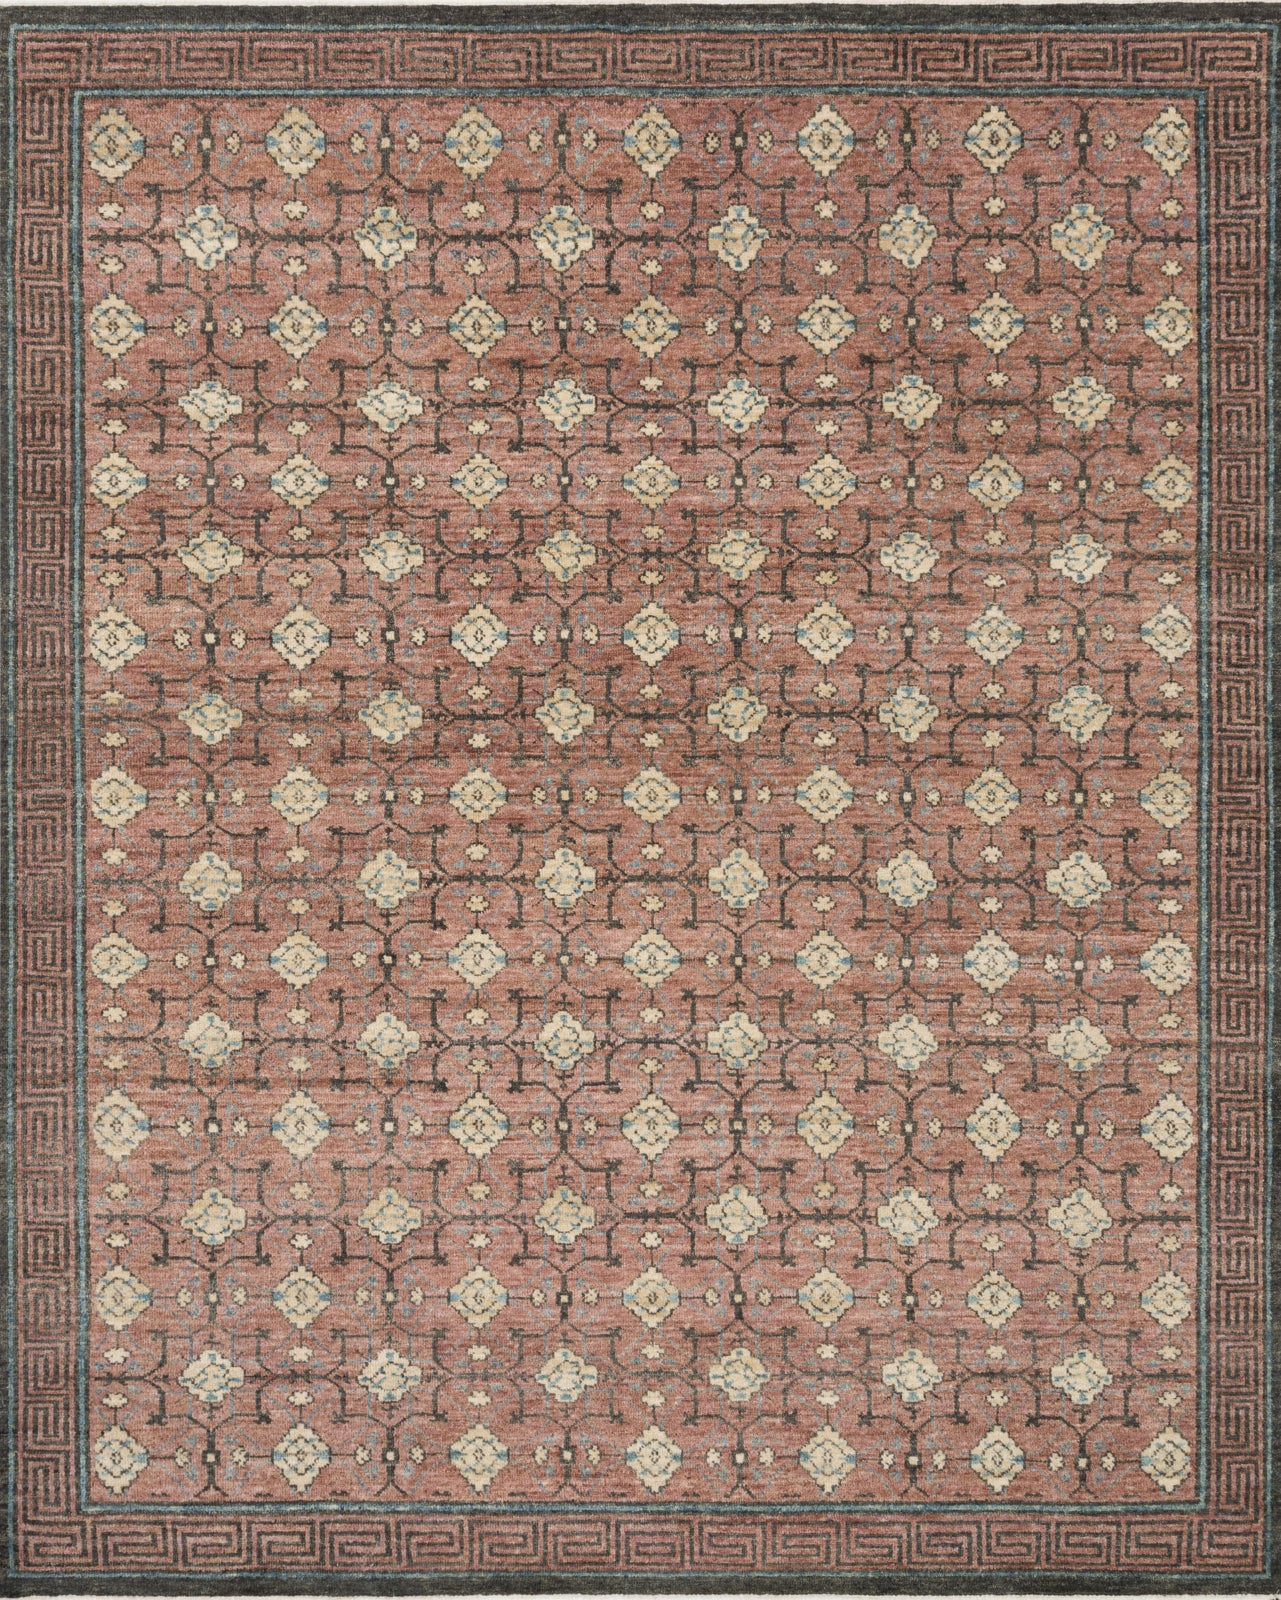 Loloi Reina REI-01 Dusty Red/Dusty Red Area Rug main image